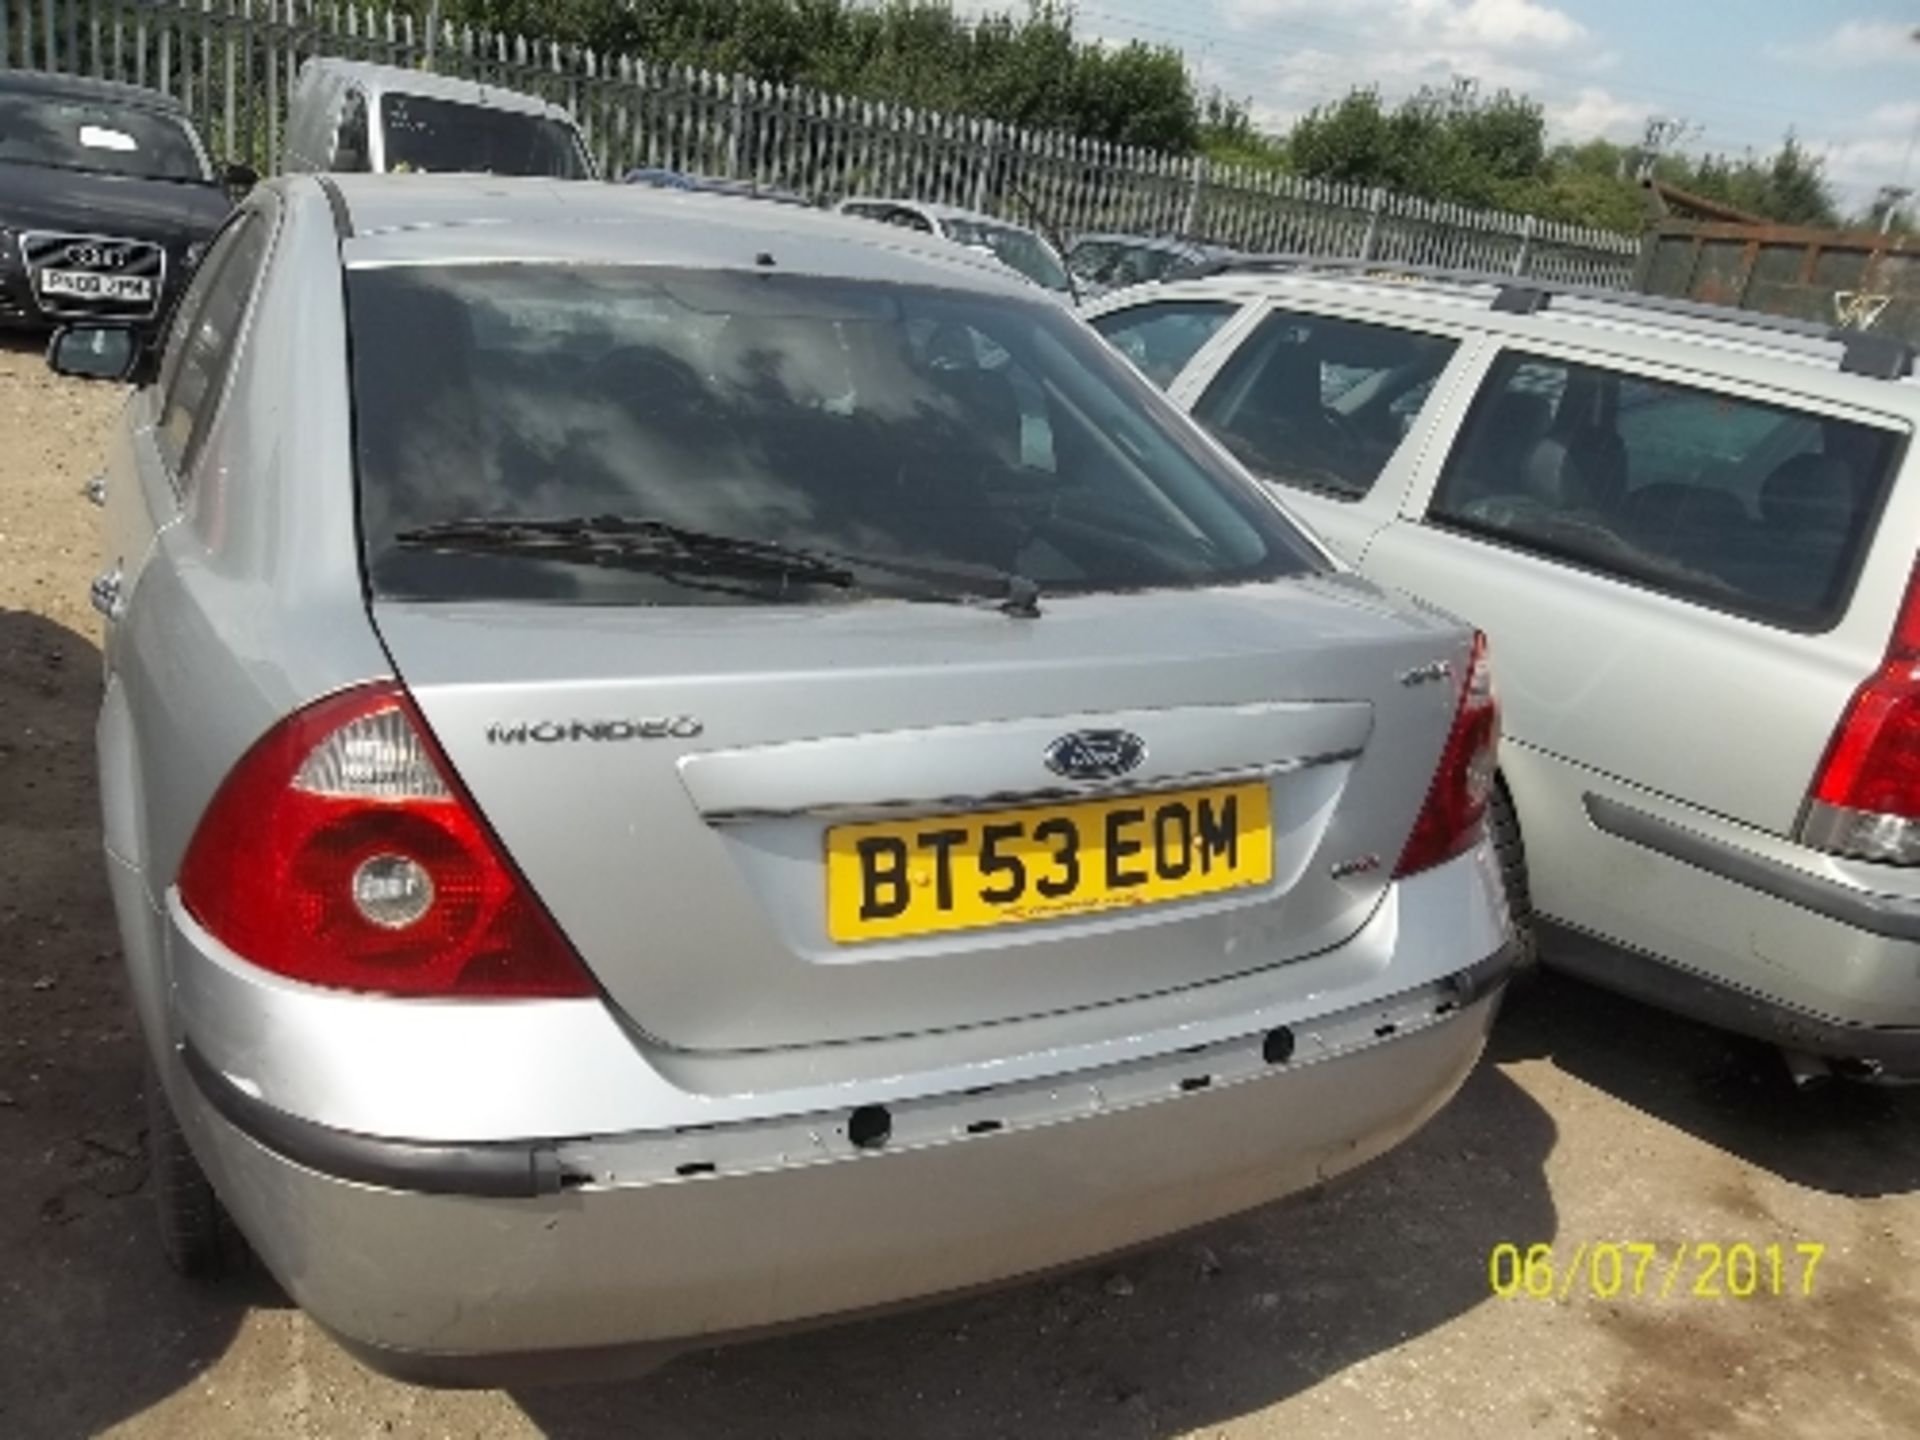 Ford Mondeo Ghia TDCI - BT53 EOM Date of registration: 26.11.2003 1998cc, diesel, manual, silver - Image 3 of 4